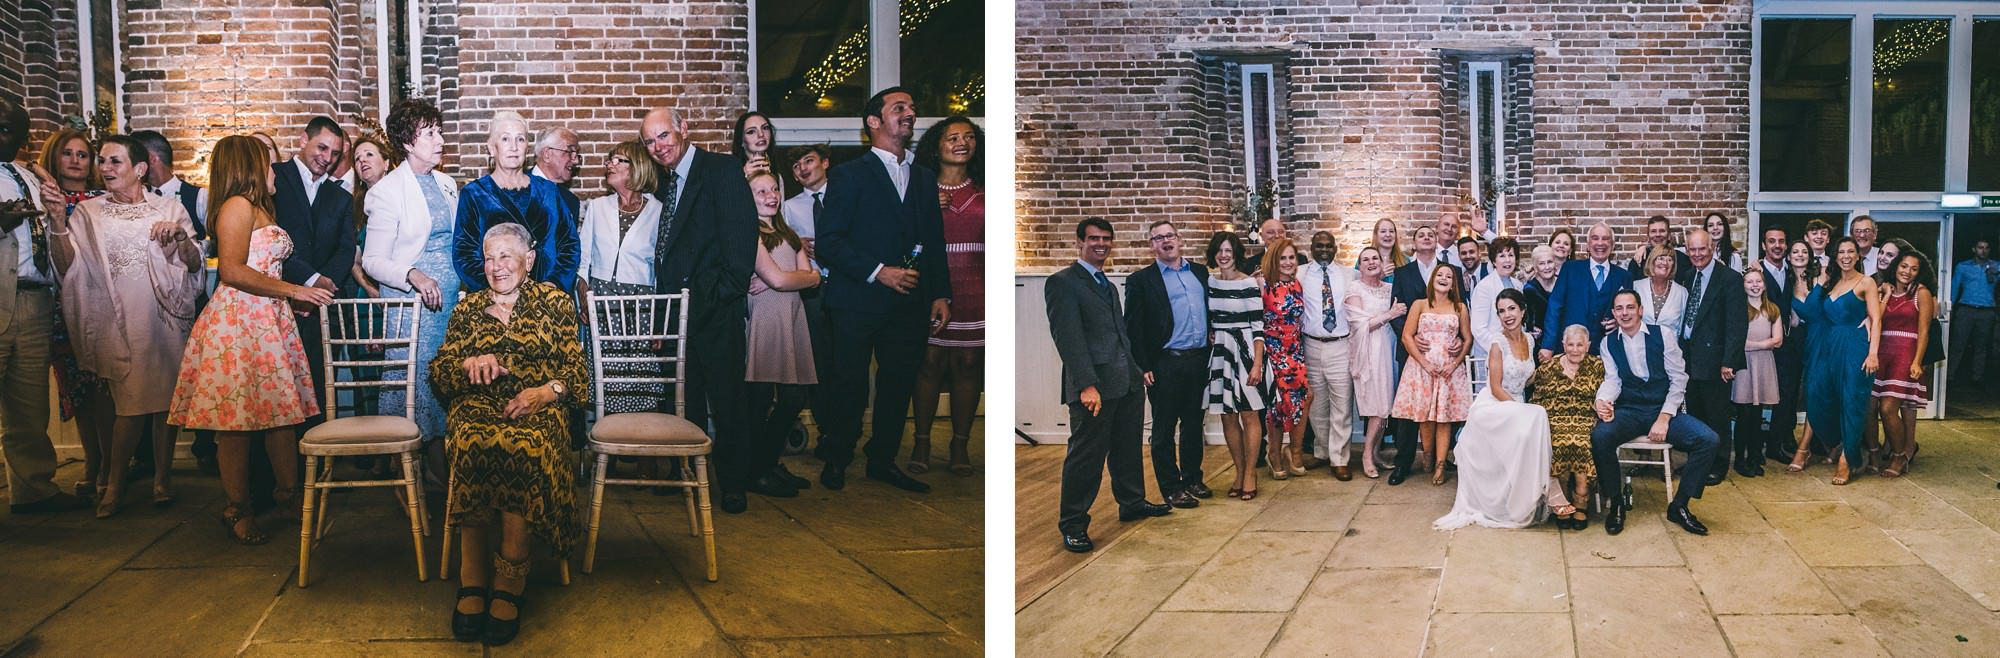 manor-mews-wedding-by-james-powell-photography-031